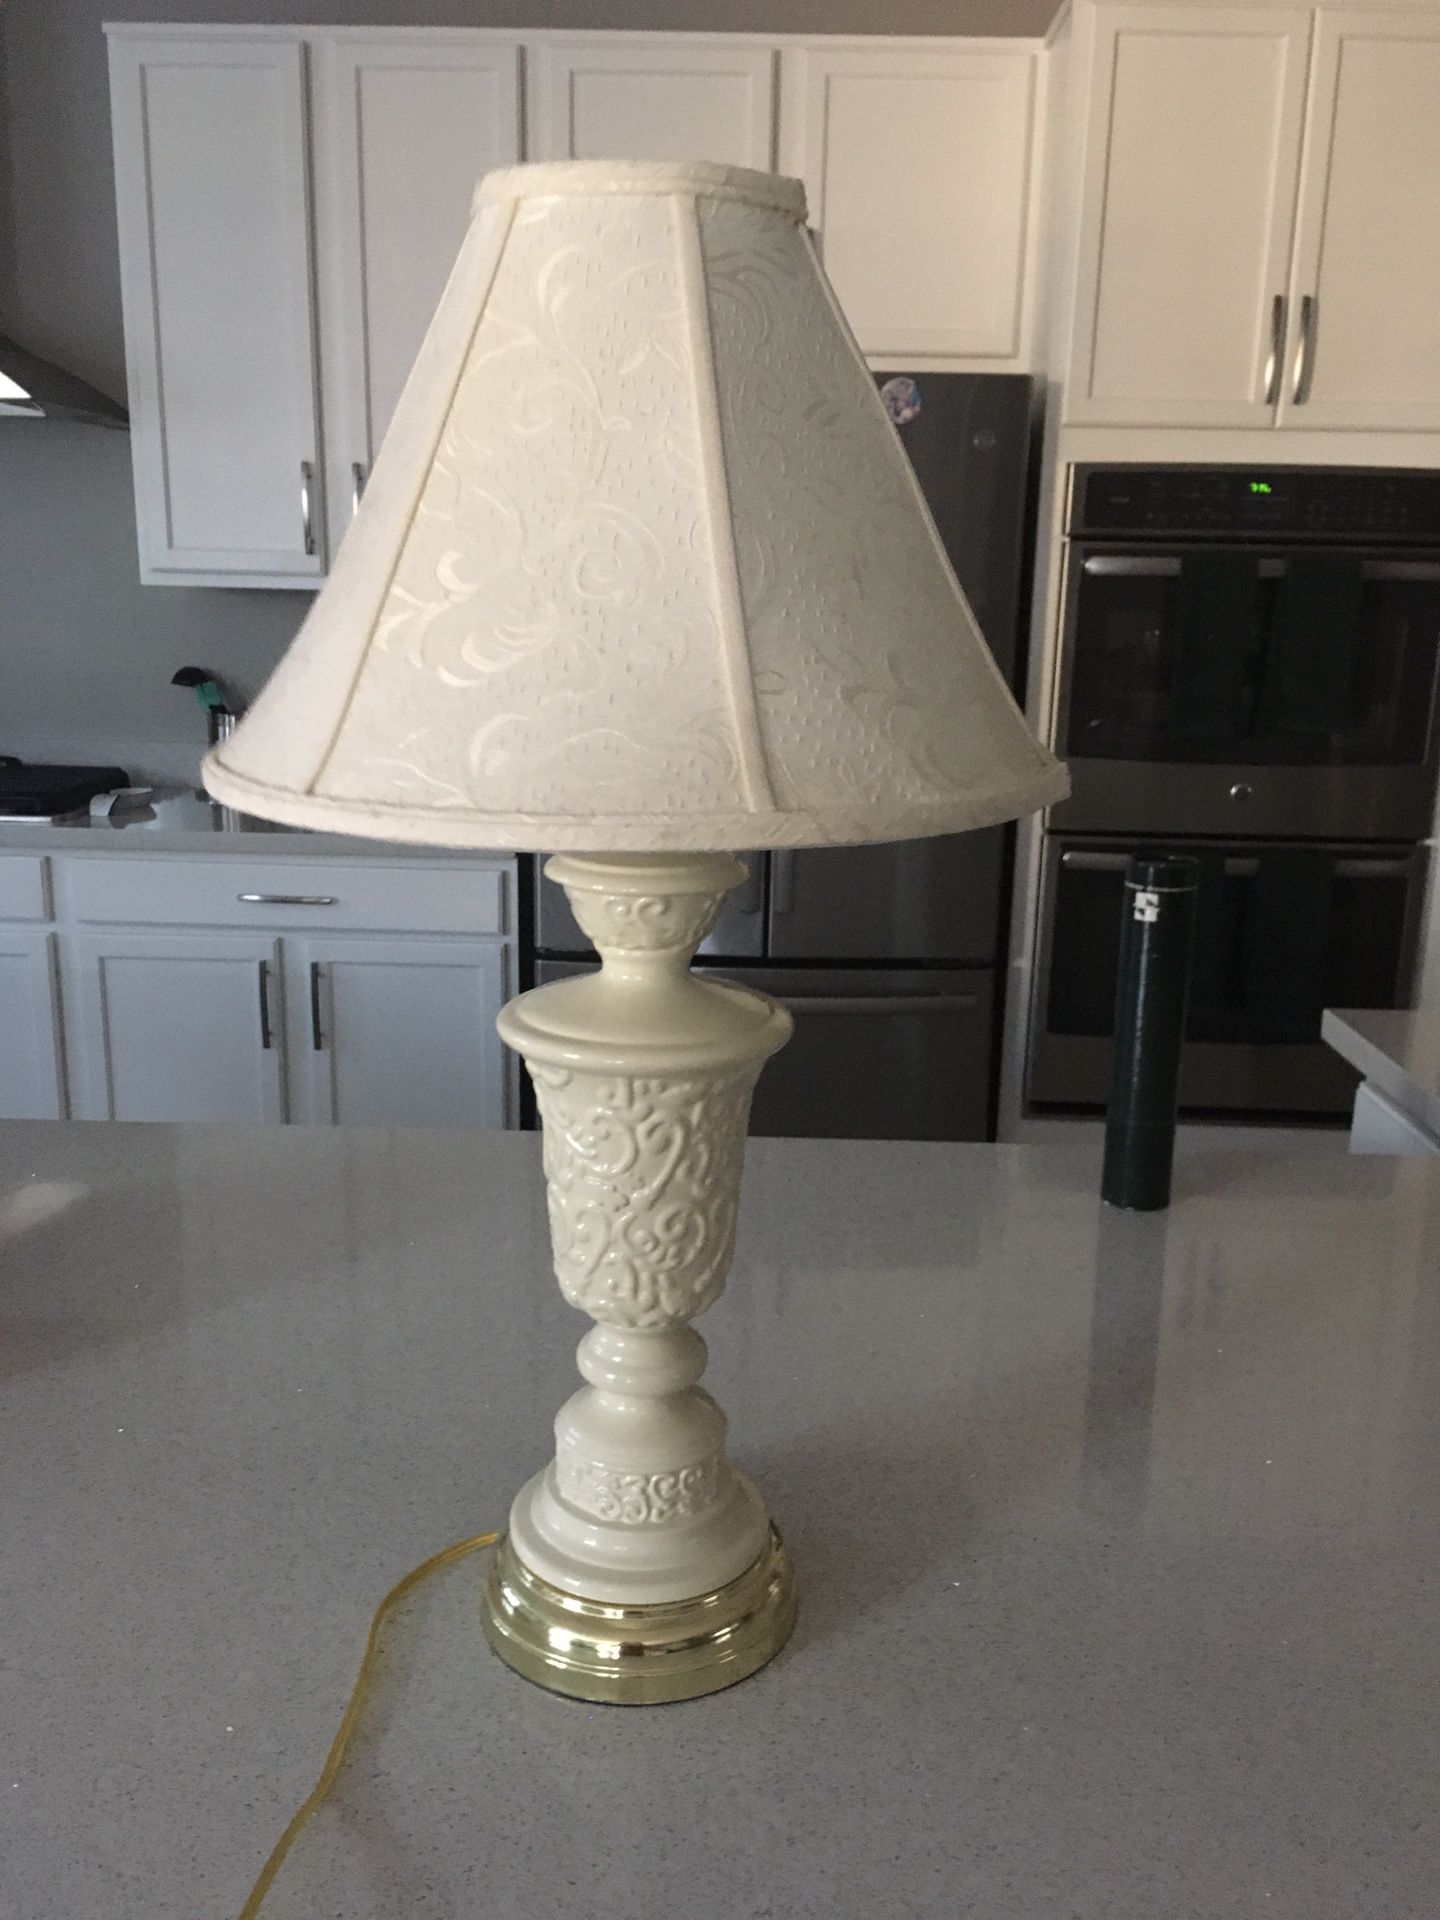 Cream and gold bedroom lamp